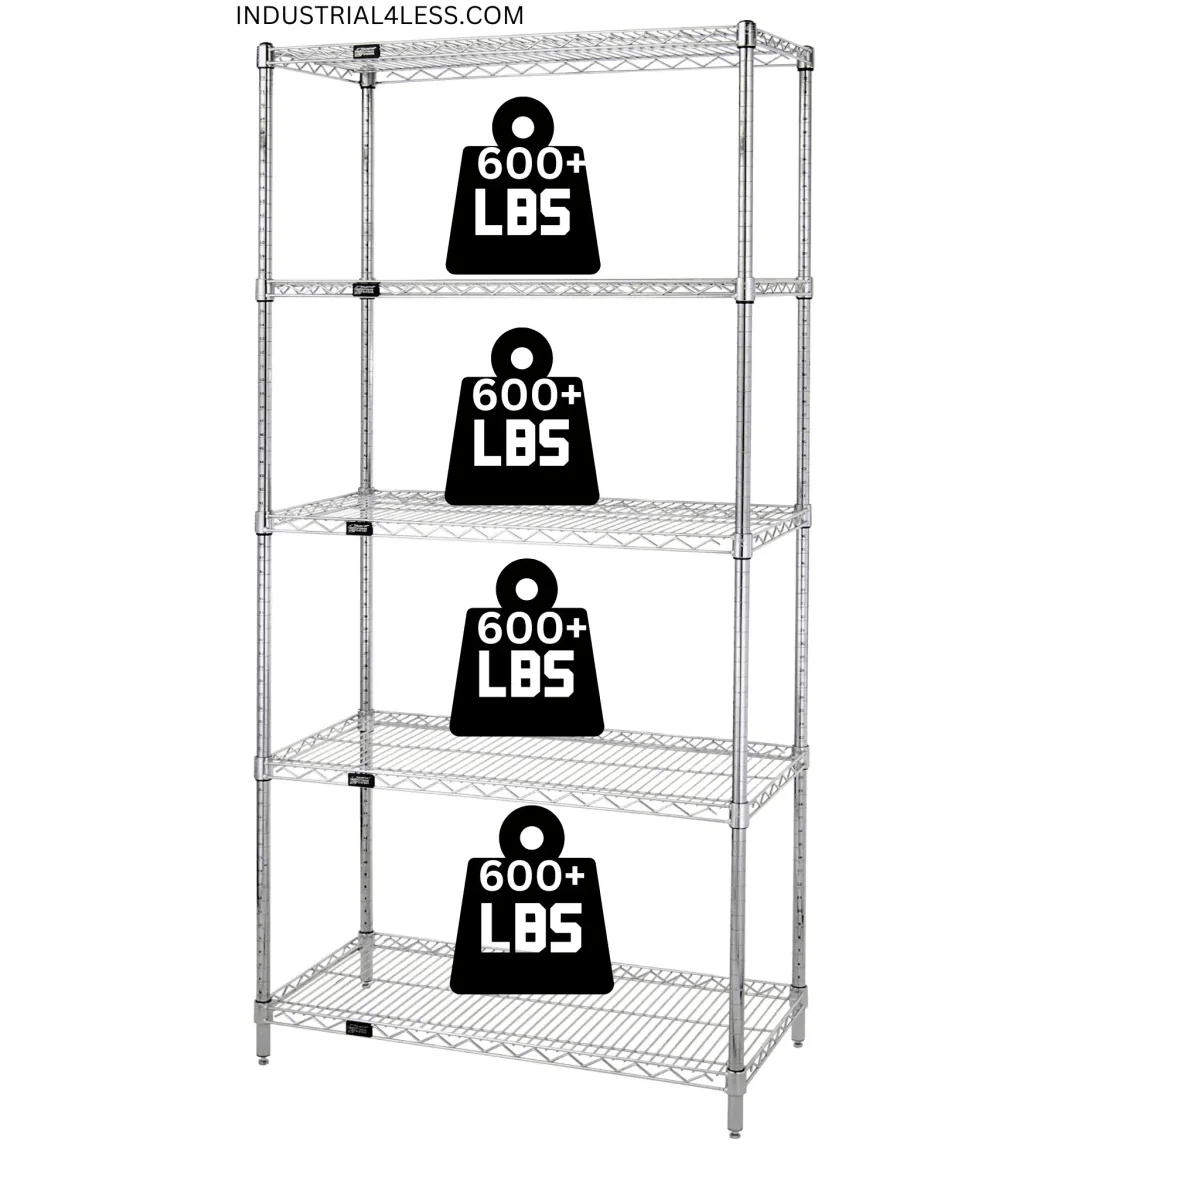 21" x 42" Stainless Steel Wire Shelving Unit - Industrial 4 Less - 21425S-5